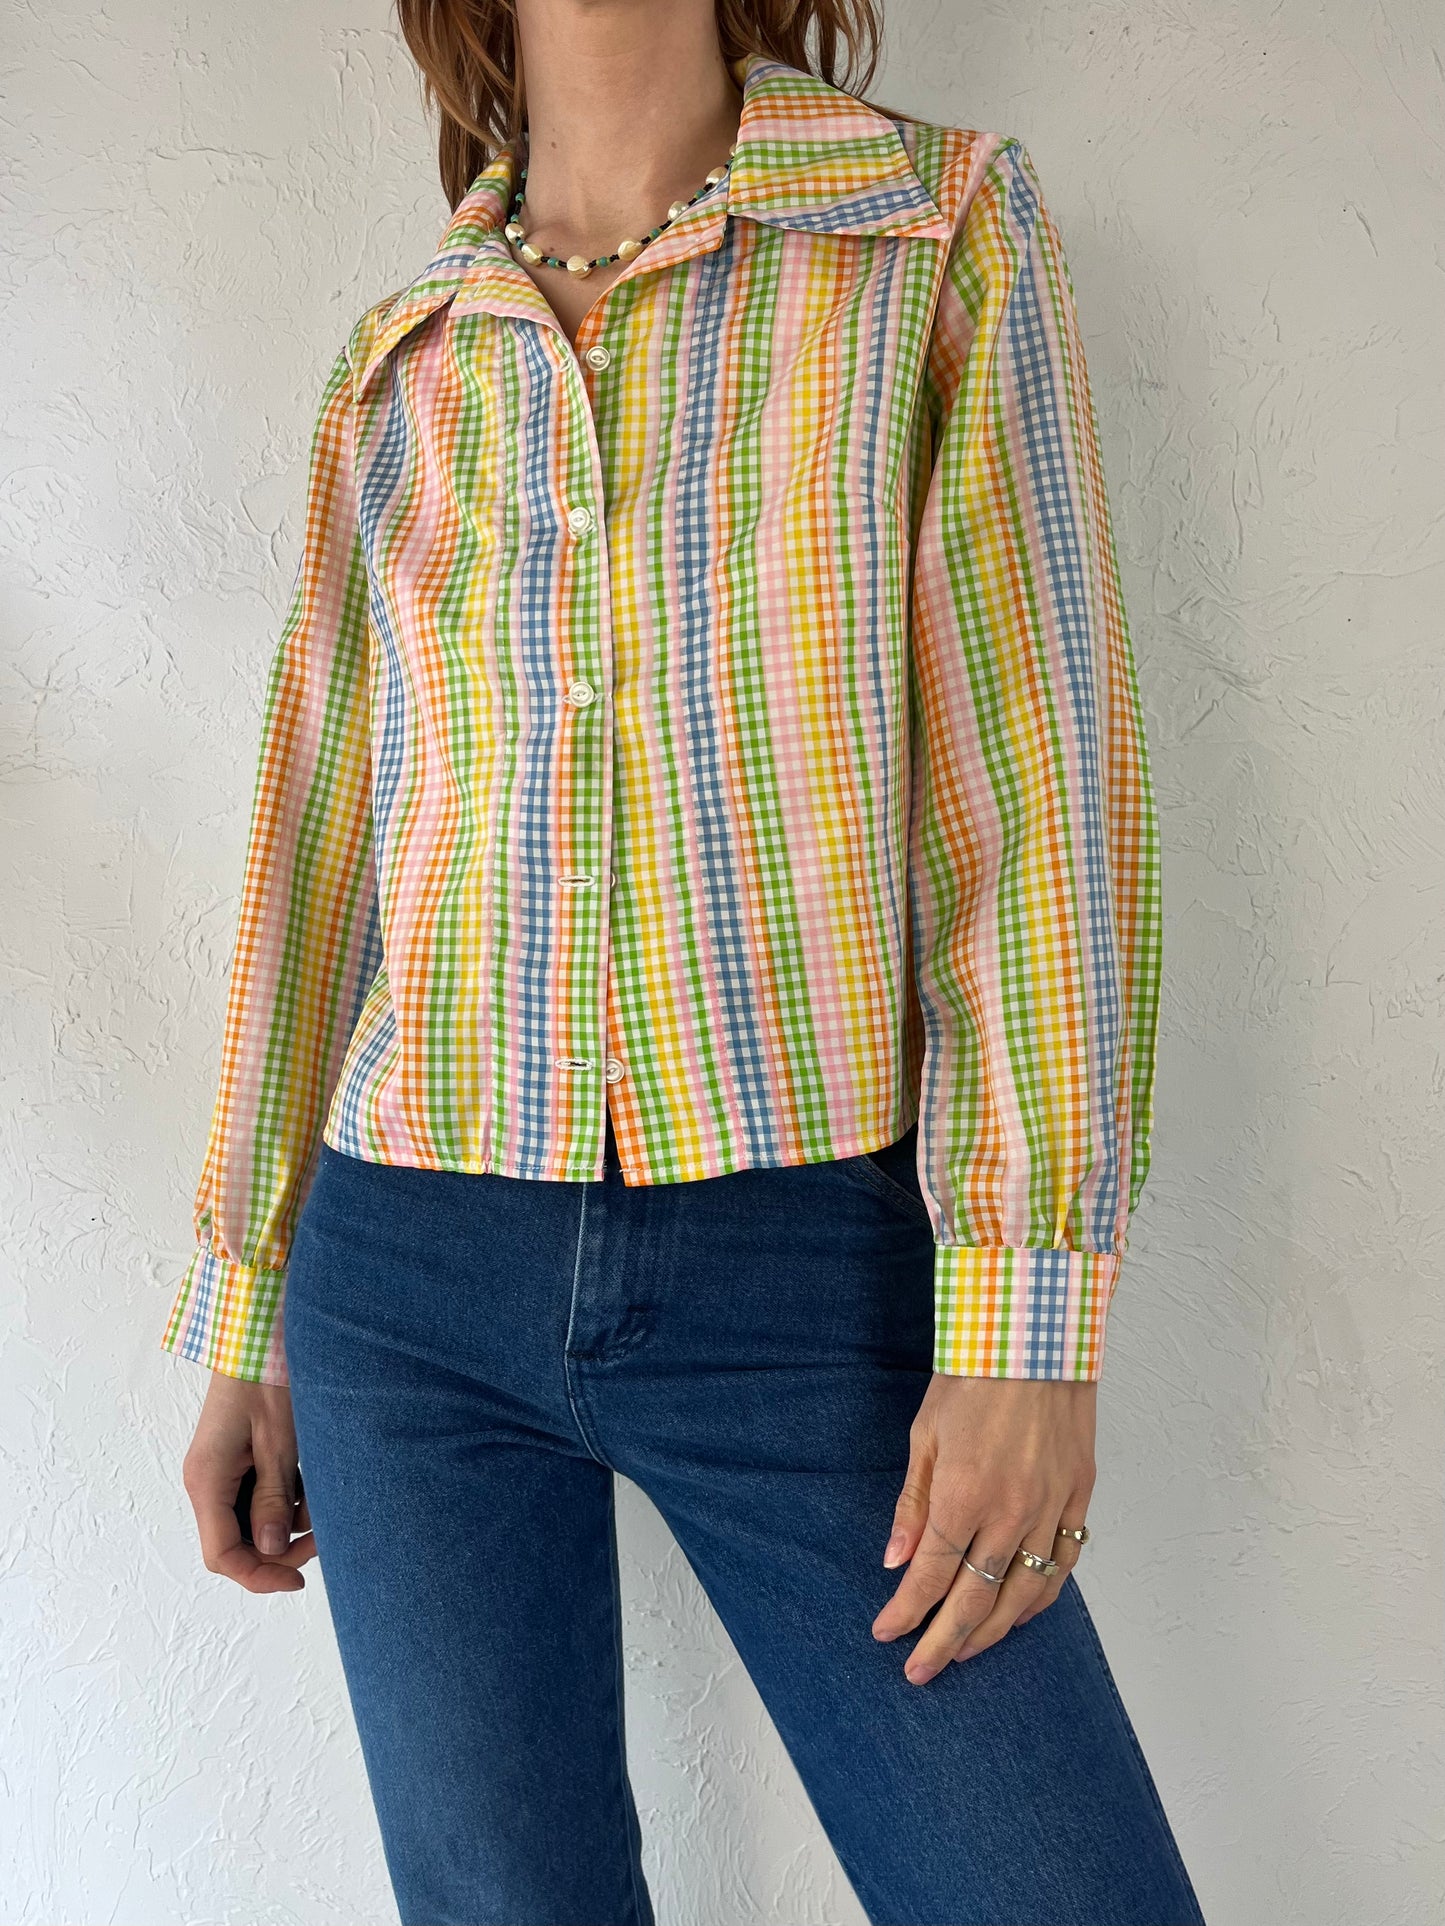 70s Rainbow Gingham Button Up Shirt / Small